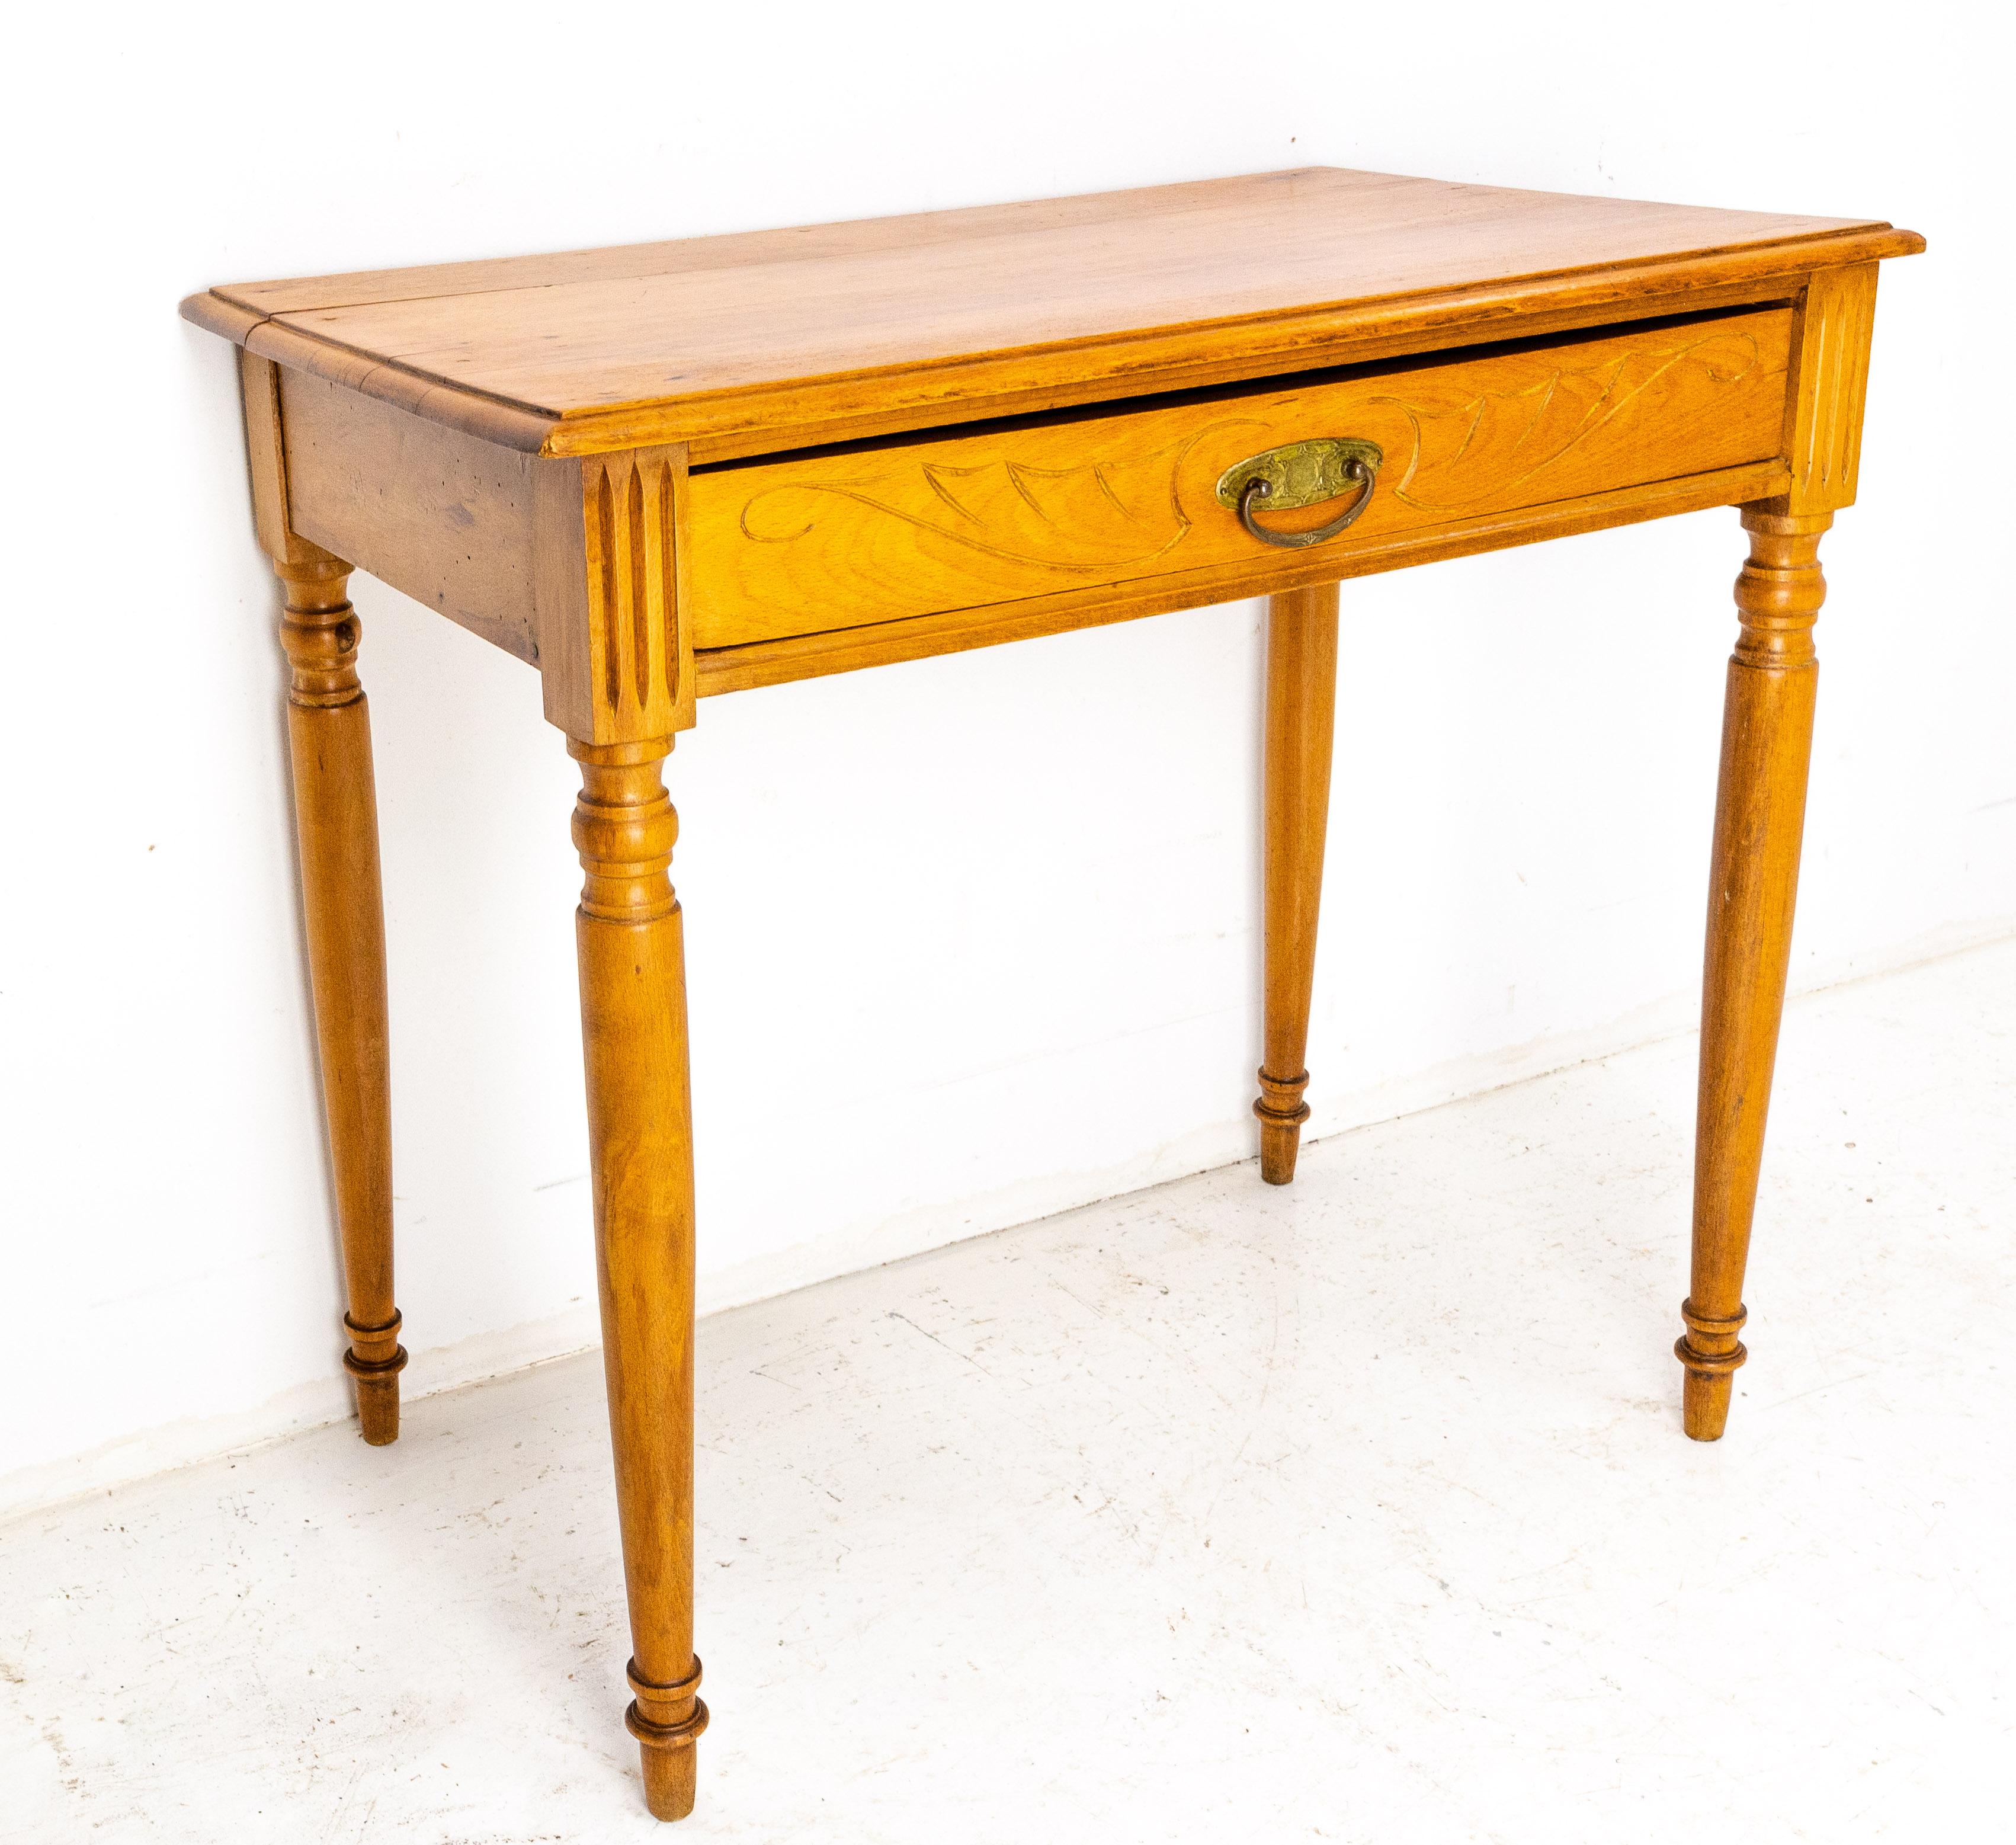 French Art Nouveau Beech Writing Table, Desk or Side Table, circa 1900 In Good Condition For Sale In Labrit, Landes